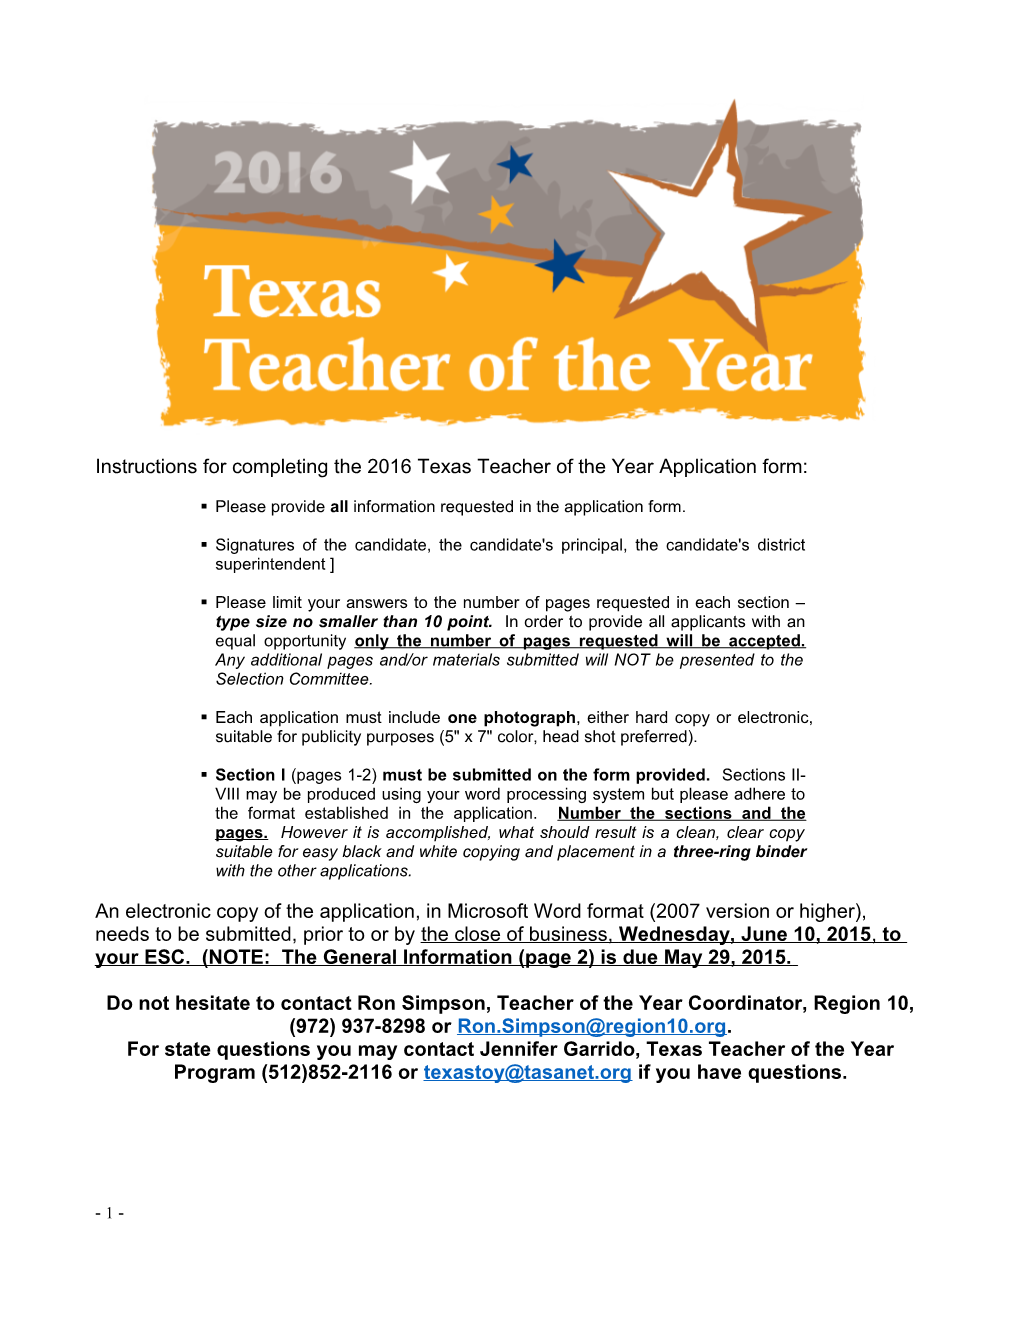 Instructions for Completing the 2016Texas Teacher of the Year Application Form